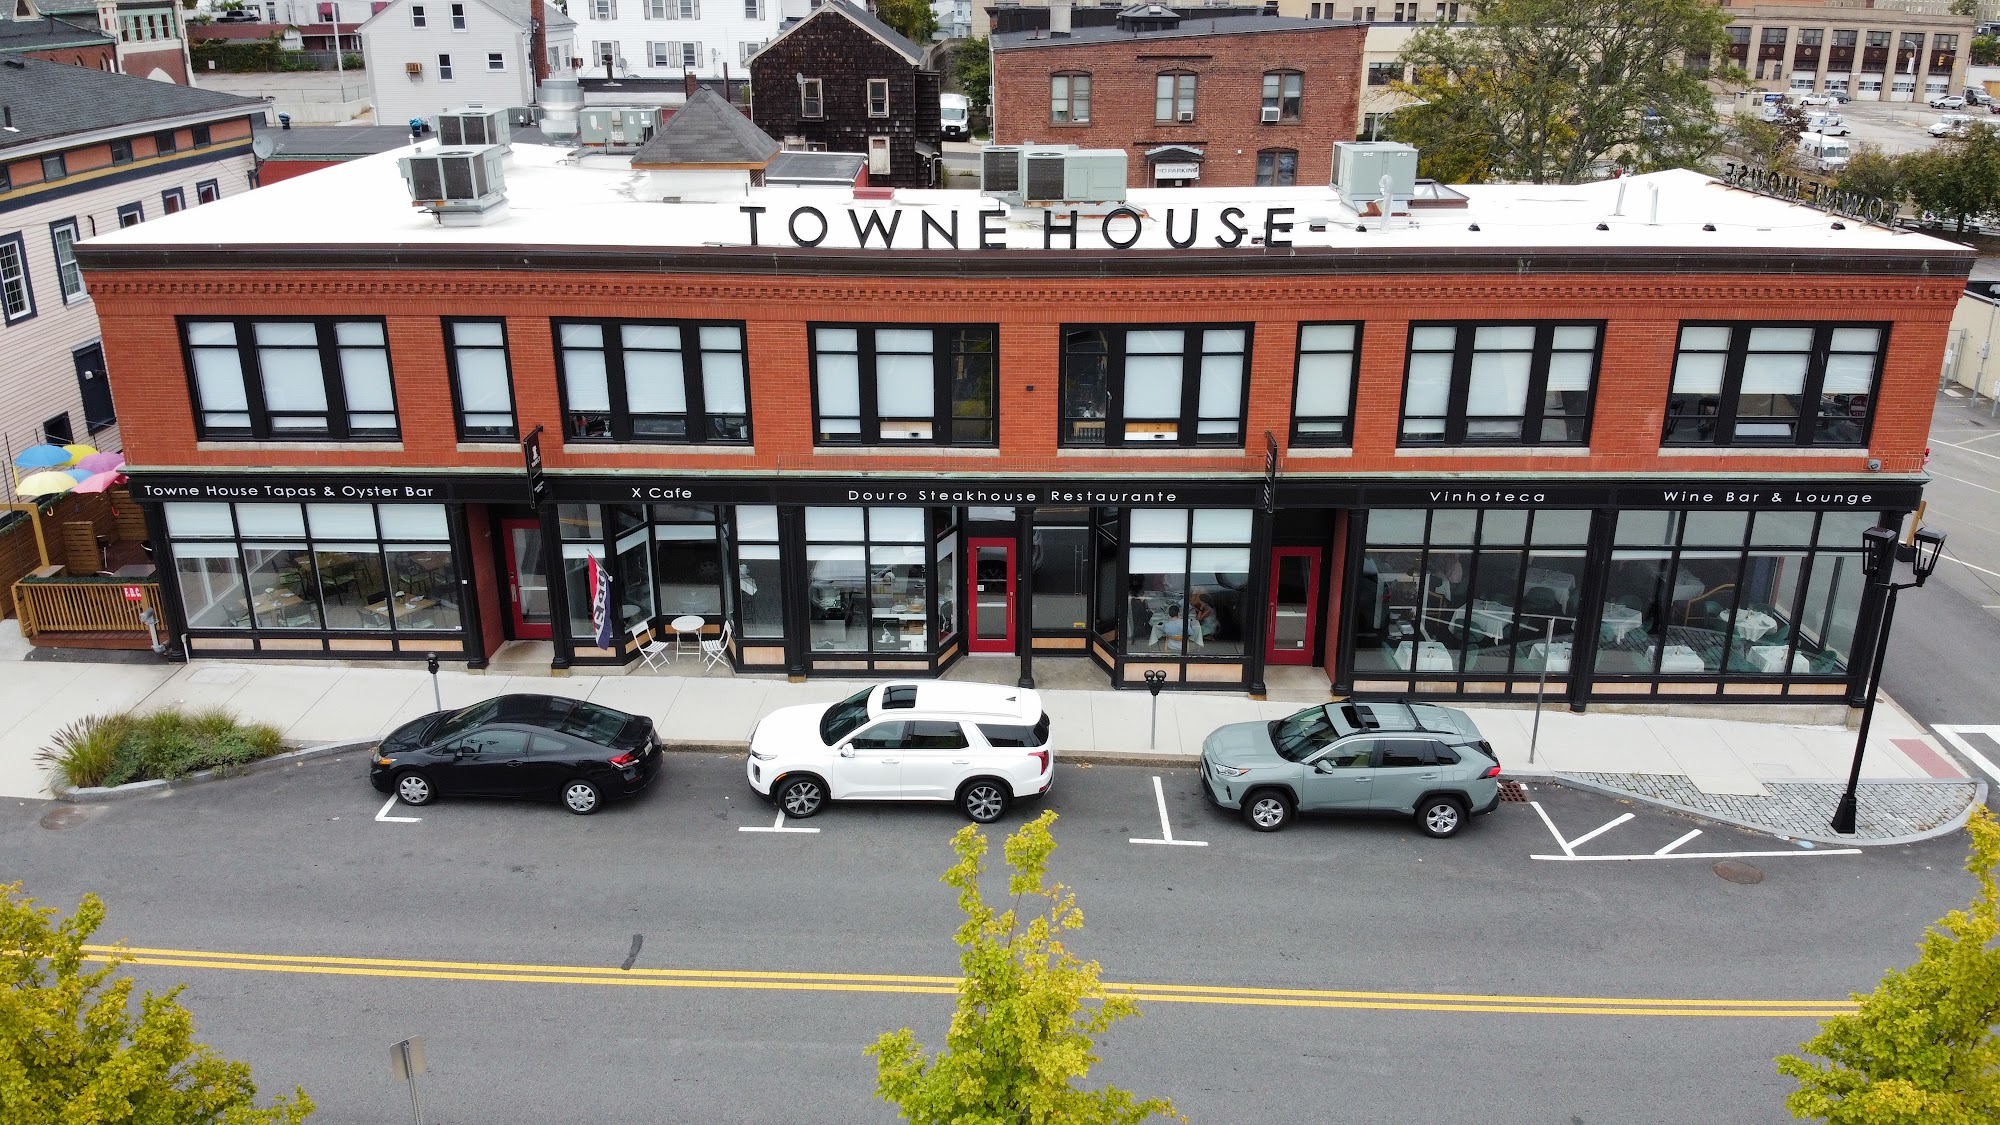 Towne House Fall River / Douro Steakhouse